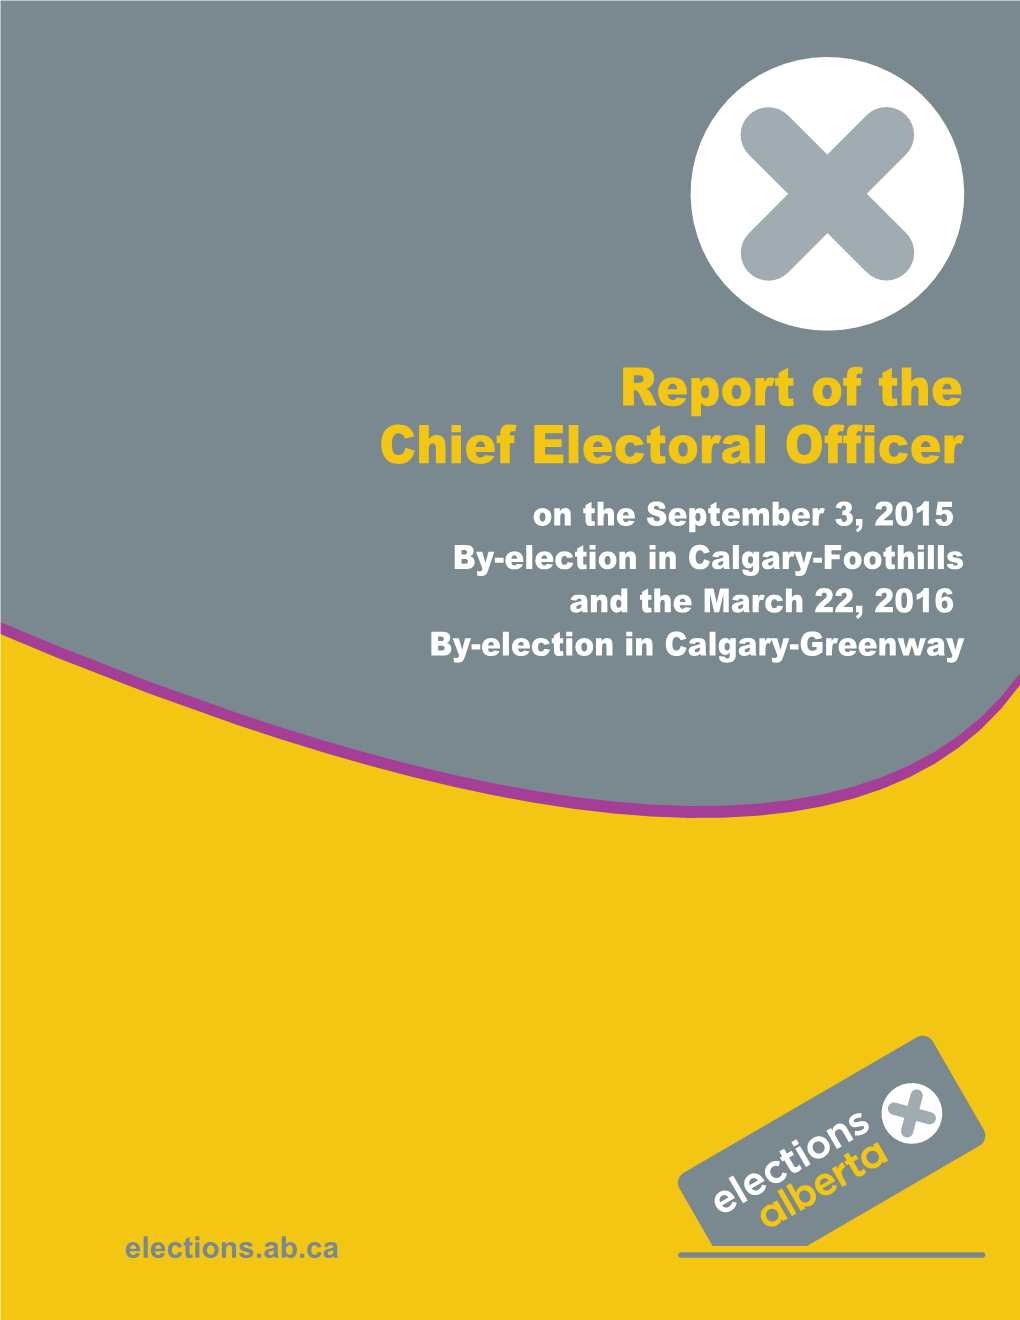 Report of the Chief Electoral Officer on the September 3, 2015 By-Election in Calgary-Foothills and the March 22, 2016 By-Election in Calgary-Greenway